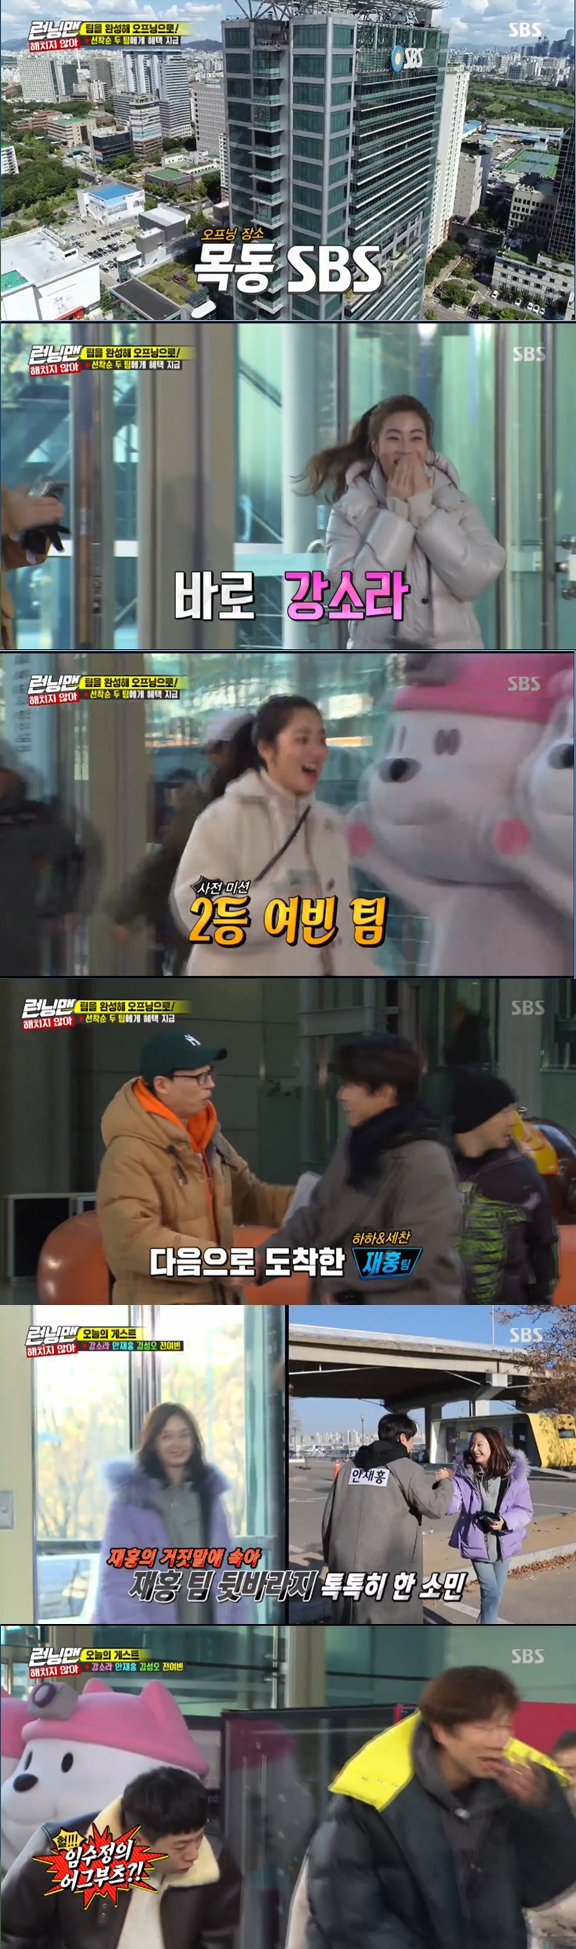 Kim Jong-kook attributed the factor to defeat to Jeon So-min.In the SBS entertainment program Running Man broadcasted on the night of the 12th, Ahn Jae-hong, Jang So-ra, Kim Sung-oh, and Jeon Yeo-bin came out as guests and performed I do not hurt race with the members.The four guests last week struggled to find the team member the production team had set; Ahn Jae-hong contacted Jeon So-min, who he usually had acquainted with, and deceived him as a team.Jeon So-min was tricked into by Ahn Jae-hong and failed to get calls from the actual same team, Kim Jong-kook and Kim Sung-oh.As a result, Kim Sung-oh team arrived at the bottom at the arrival point and did not receive the championship privilege to receive only two first-come-first-served teams.Kim Jong-kook, who entered the SBS Prism Tower with bottom, was angry that Jeon So-min was possessed by a man and ruined after confirming his rank.Jeon So-min has not been freed from the shock of betrayal even after arriving at the opening venue.